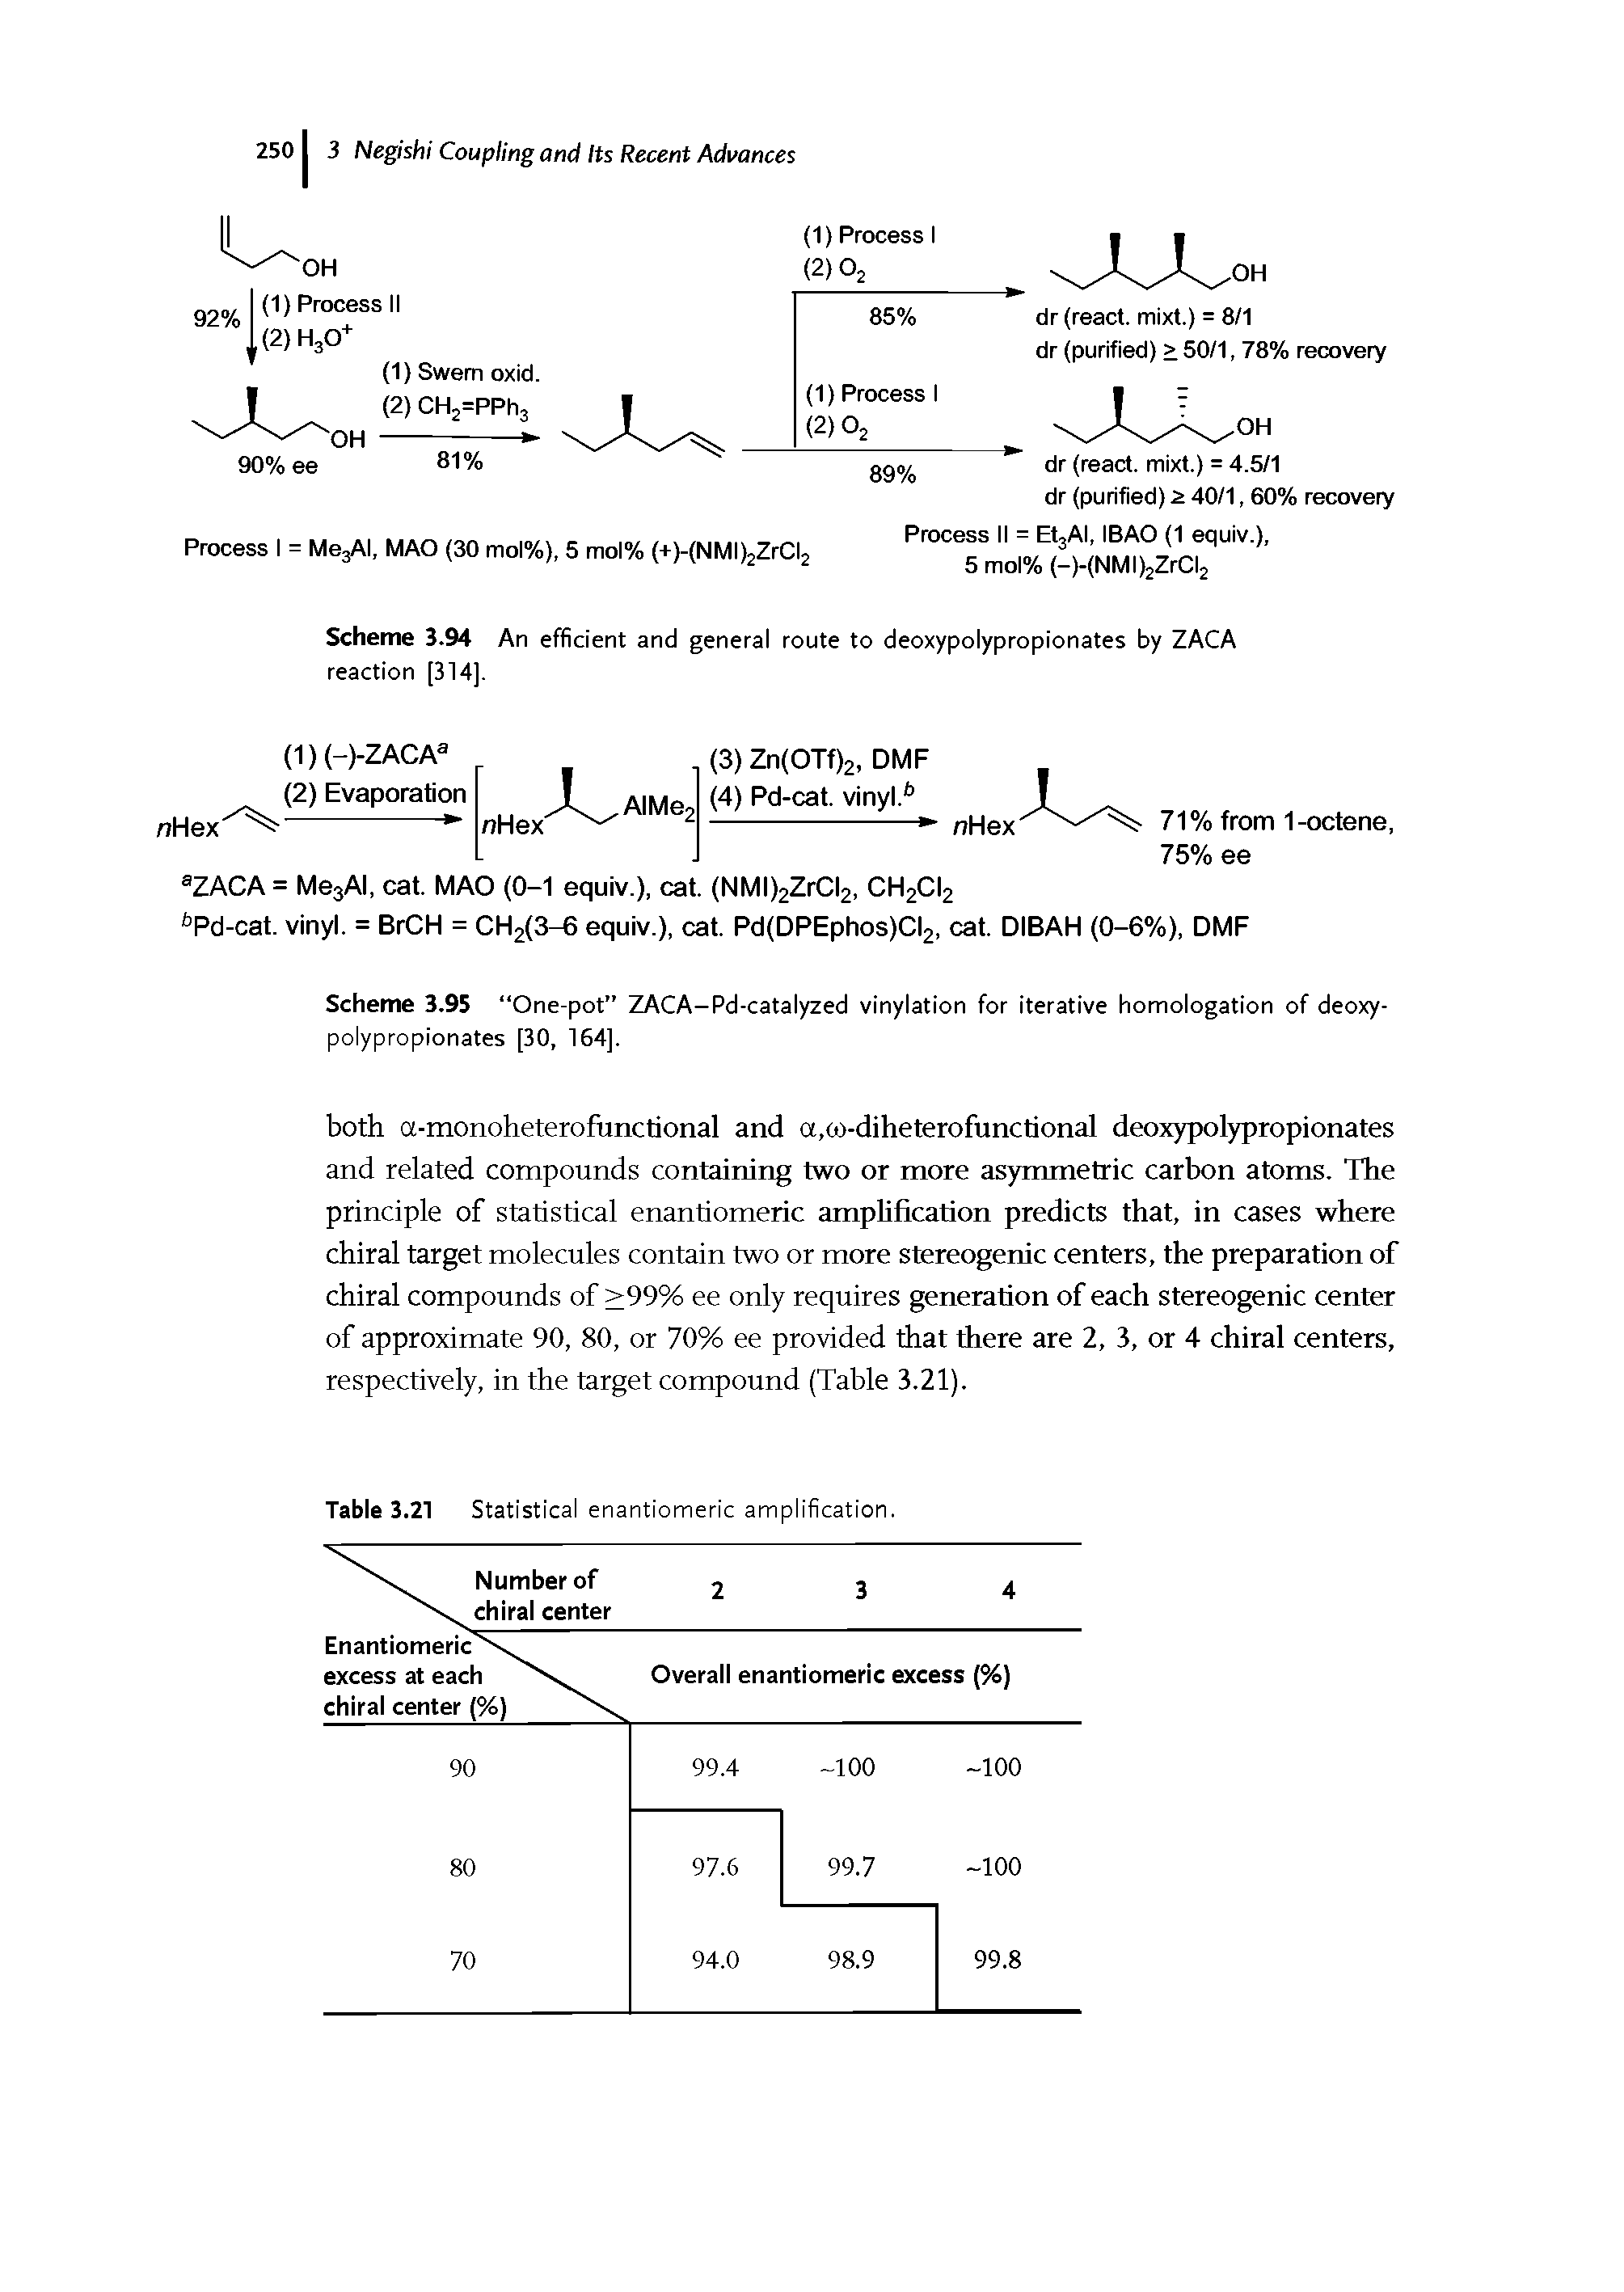 Scheme 3.94 An efficient and general route to deoxypolypropionates by ZACA reaction [314].